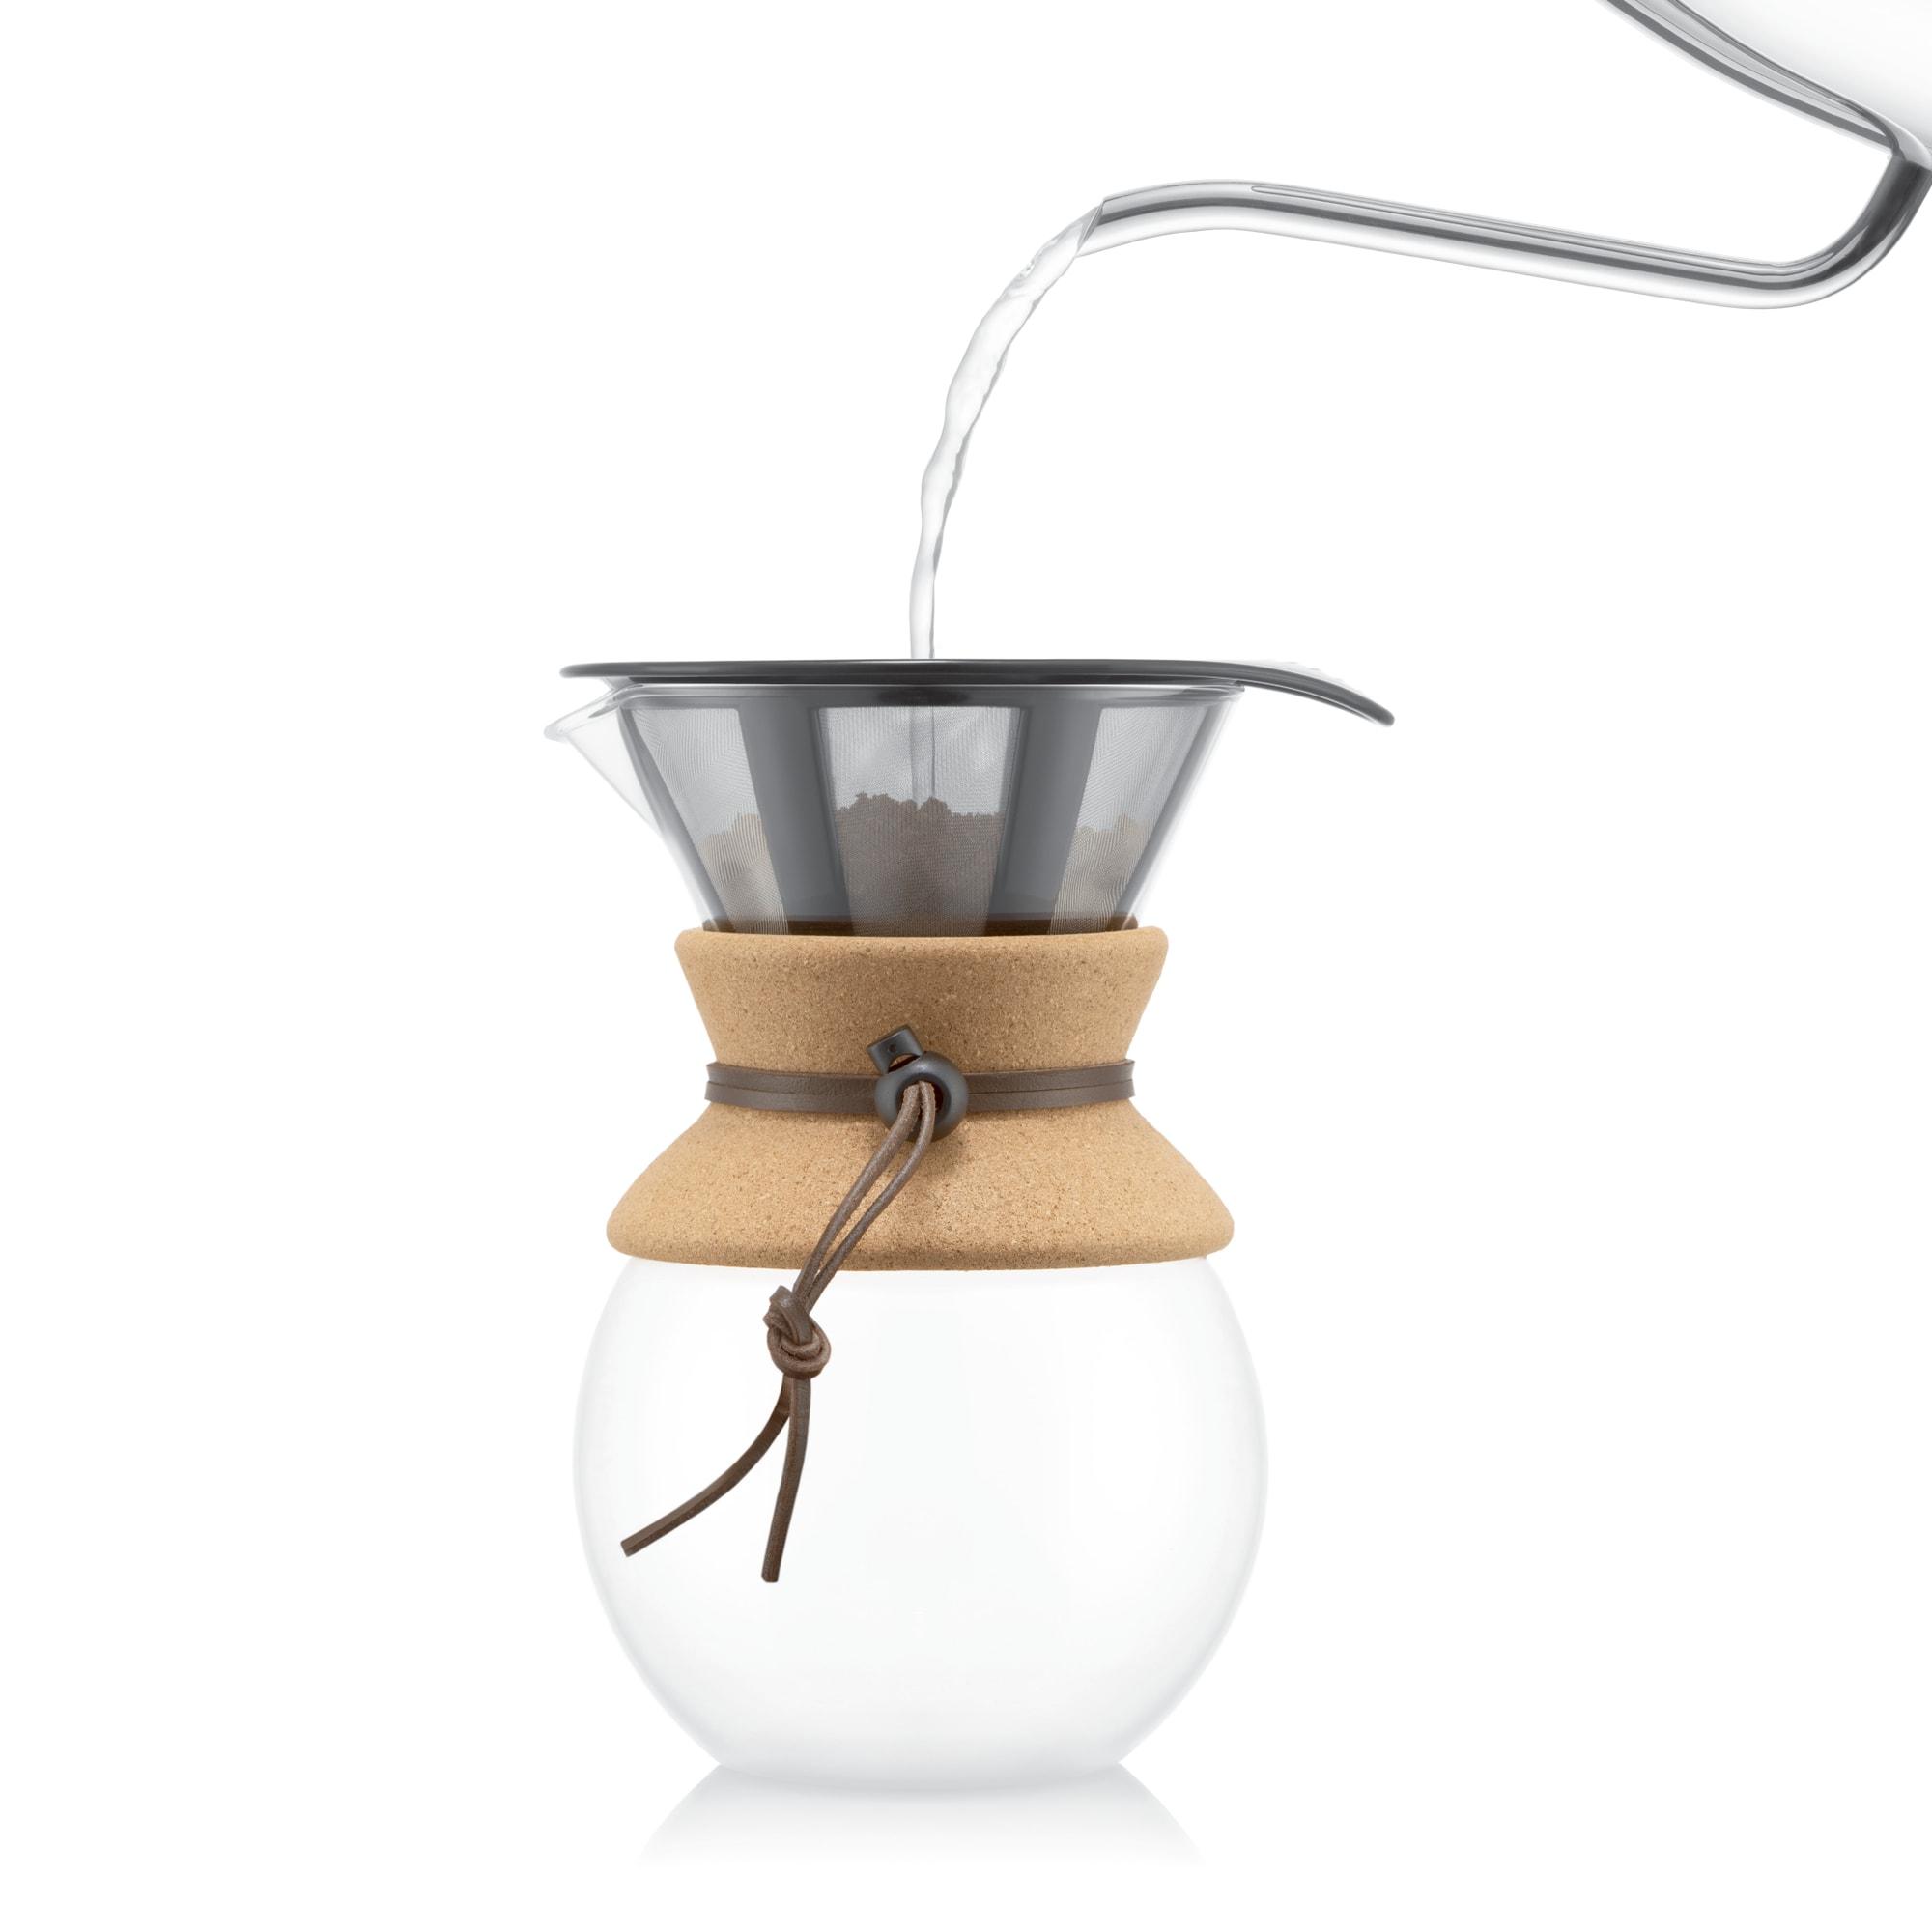 Bodum Pour Over Coffee Maker 8 Cup Image 5